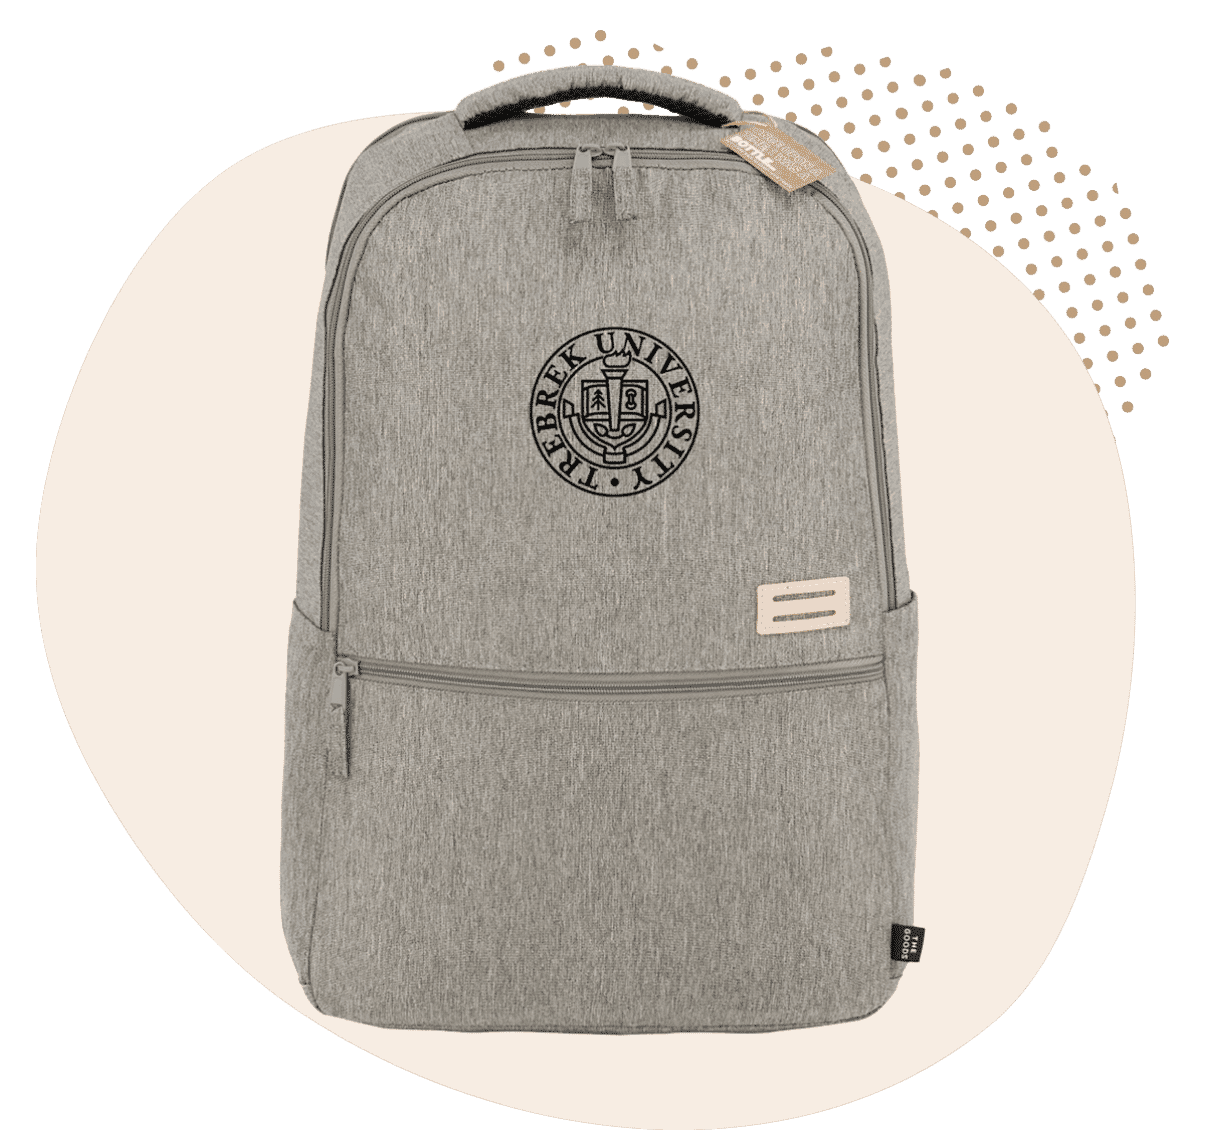 36. The Goods™ Recycled 17" Laptop Backpack